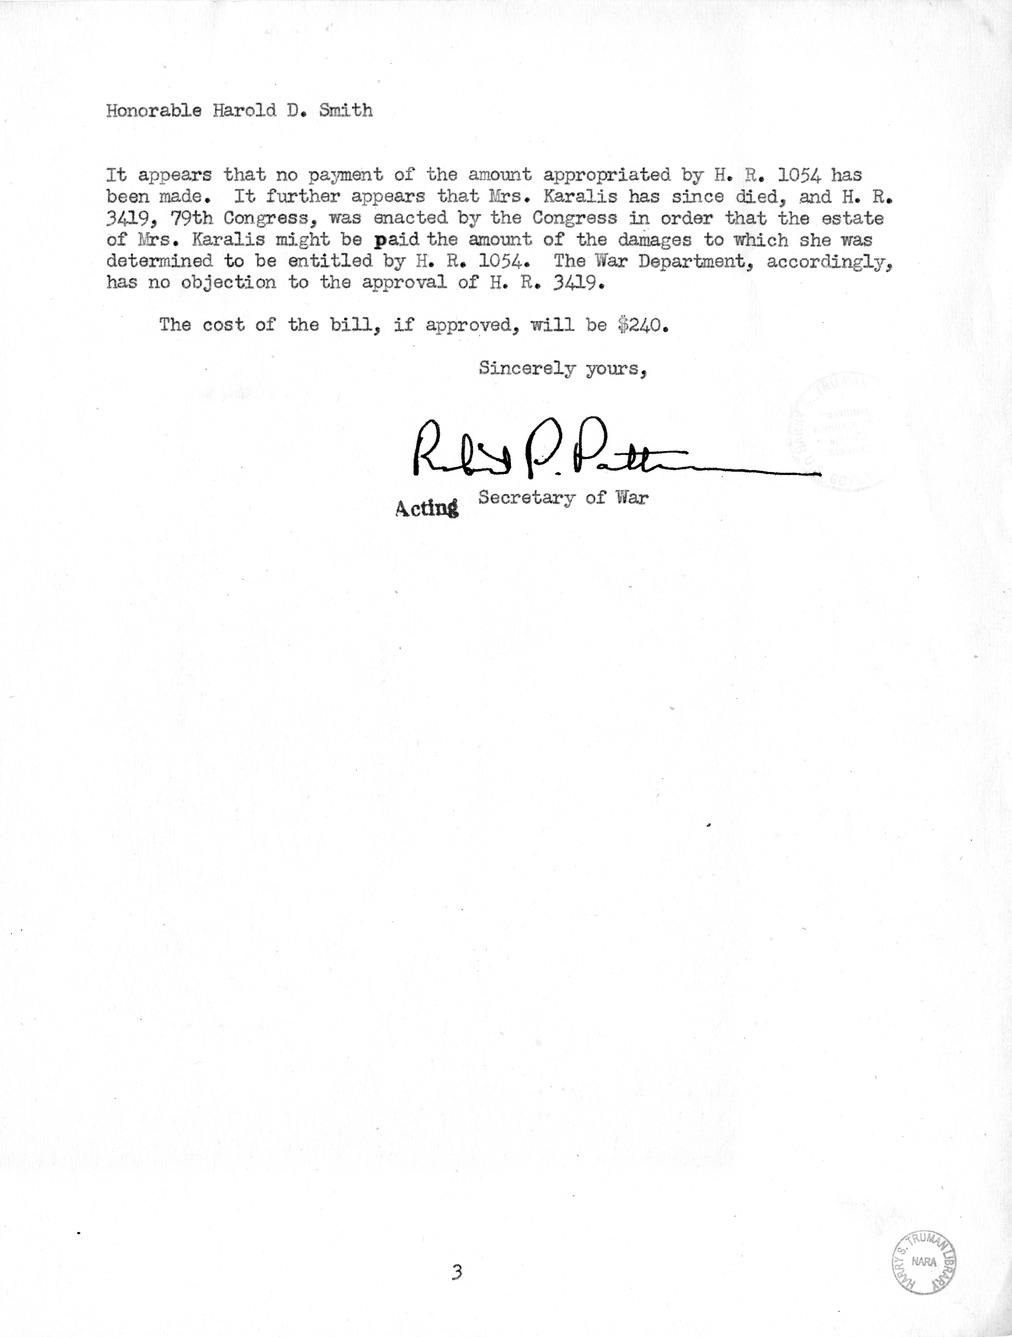 Memorandum from Harold D. Smith to M. C. Latta, H.R. 3419, For the Relief of the Estate of Mrs. Mary Karalis, with Attachments